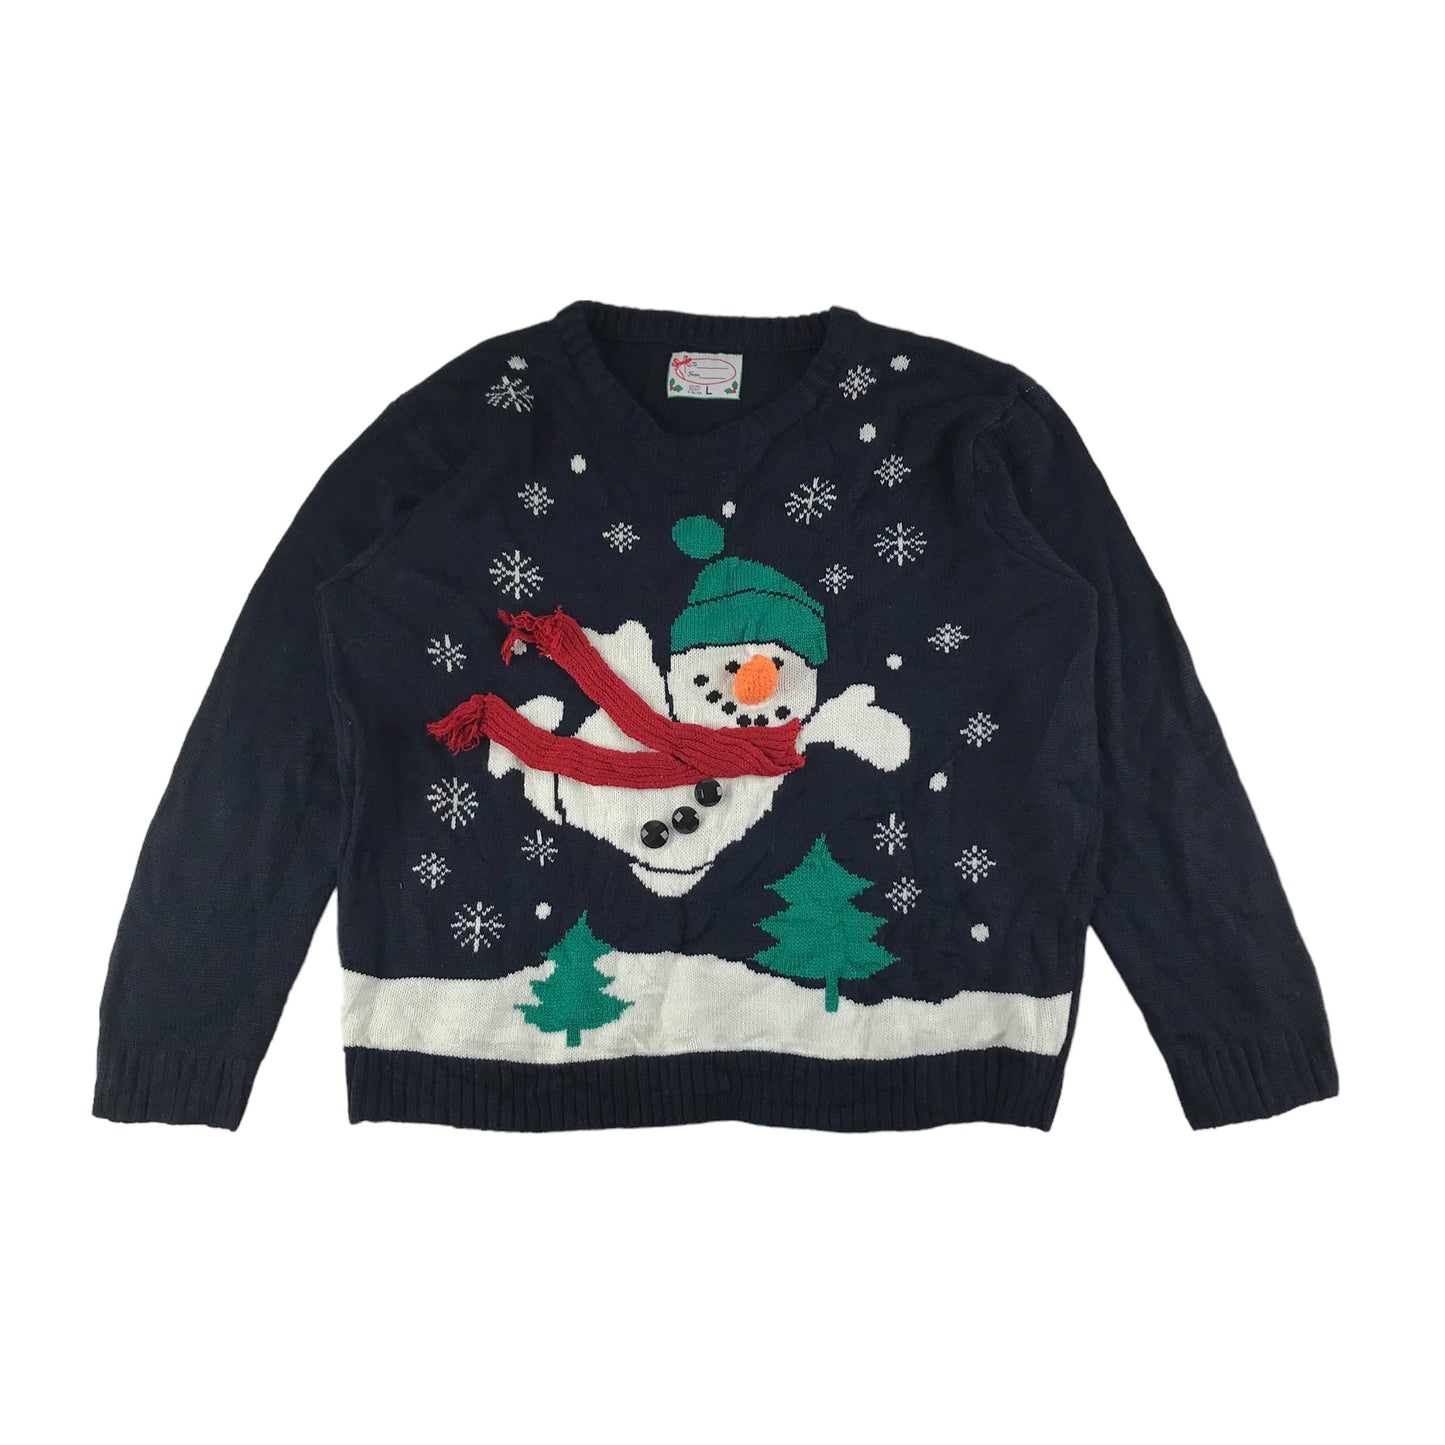 Primark Christmas Jumper Adult Large Navy Flying Snowman Graphic Jersey Long Sleeve